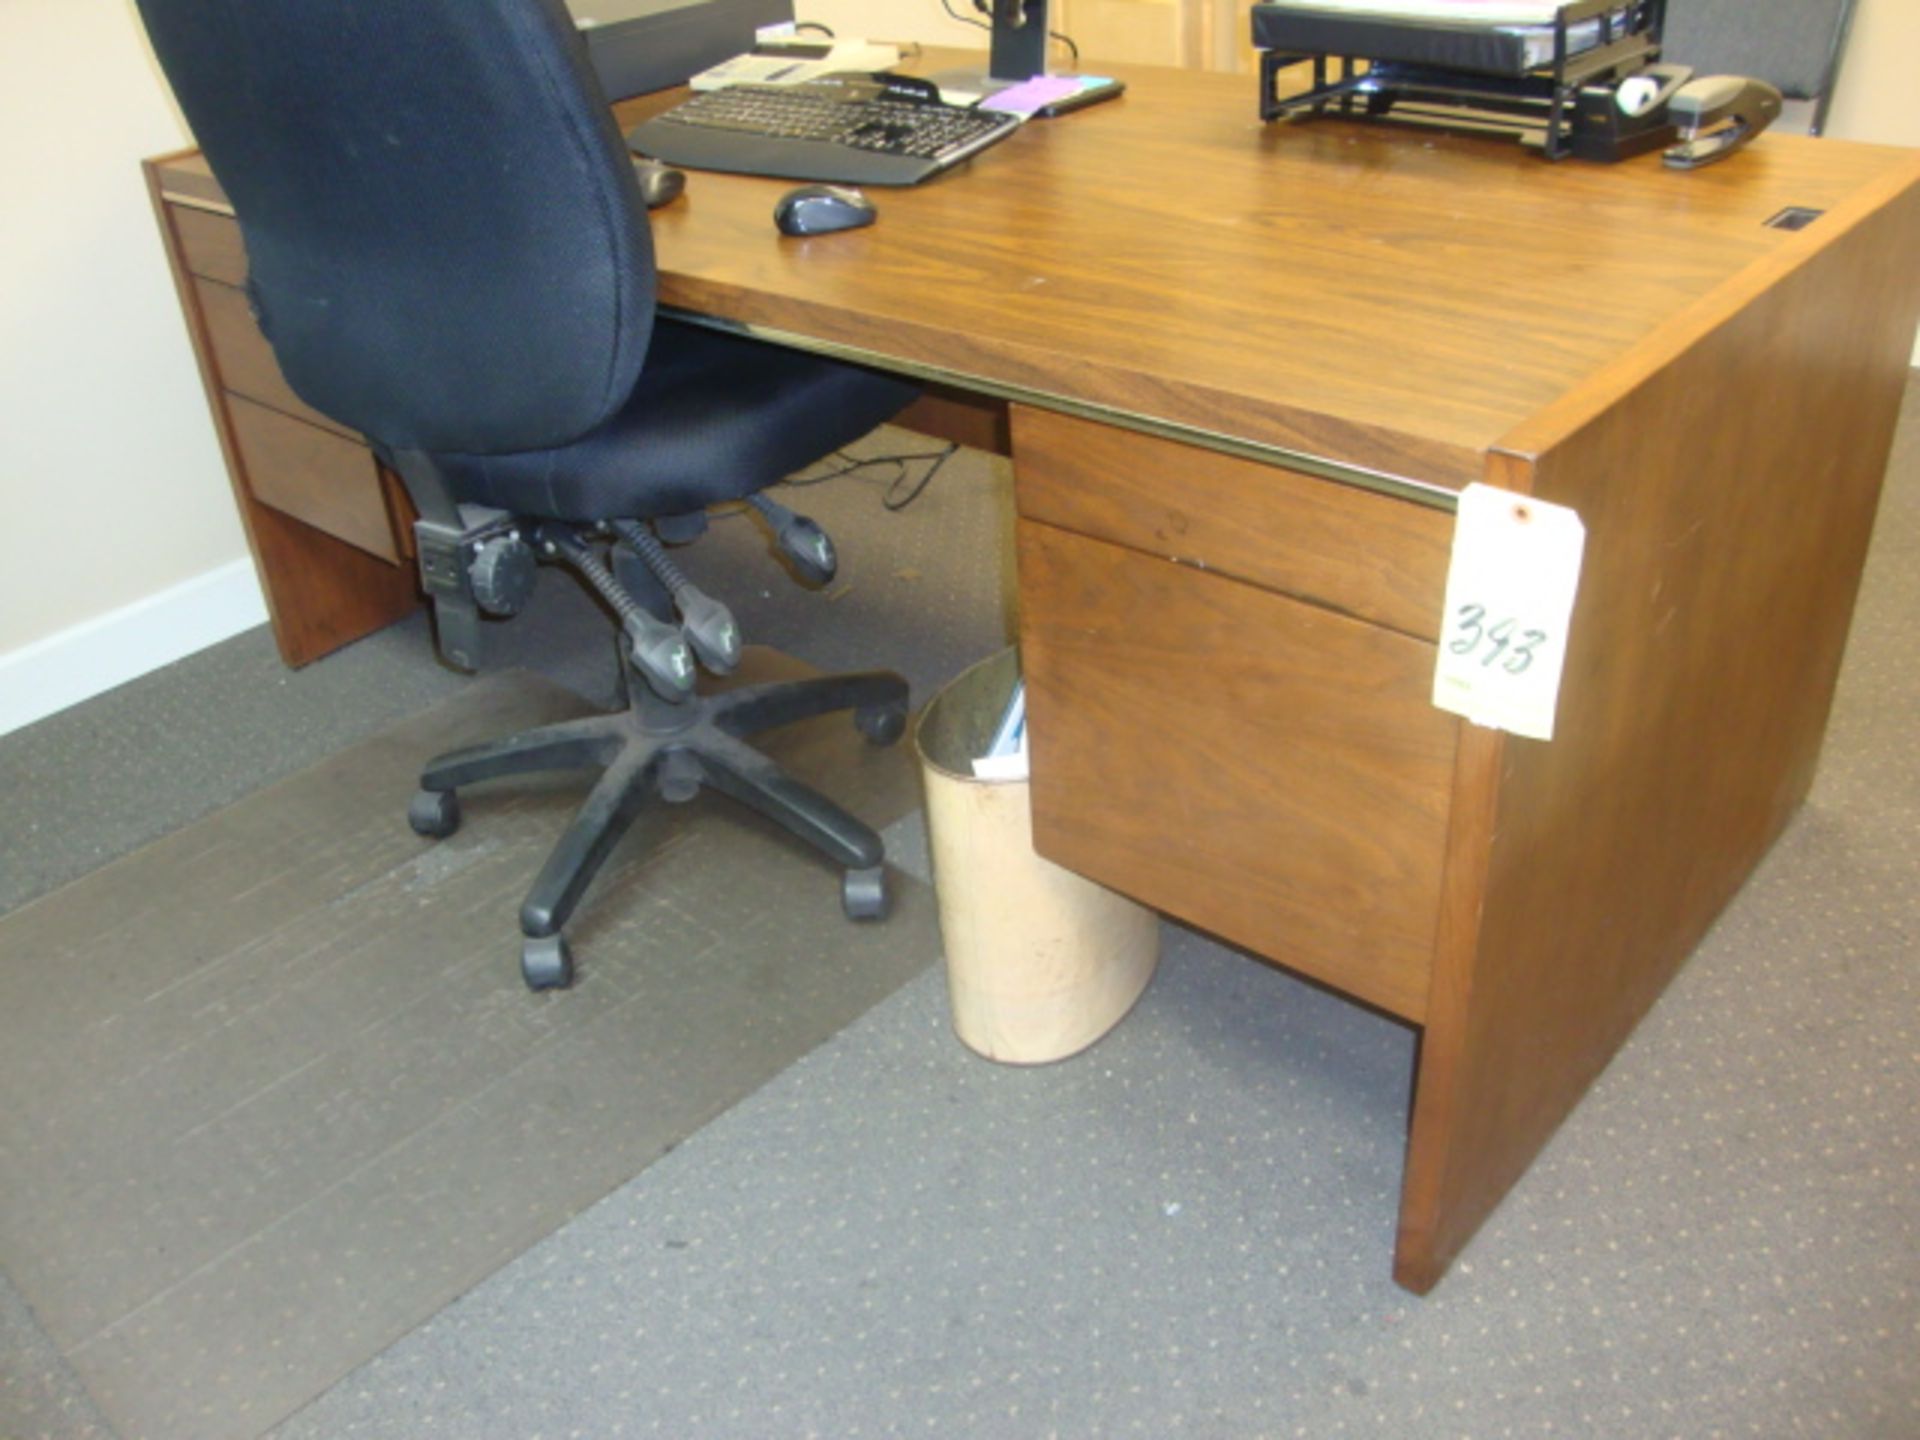 LOT CONSISTING OF 36" X 72" DOUBLE PEDESTAL WOOD DESK & CHAIR